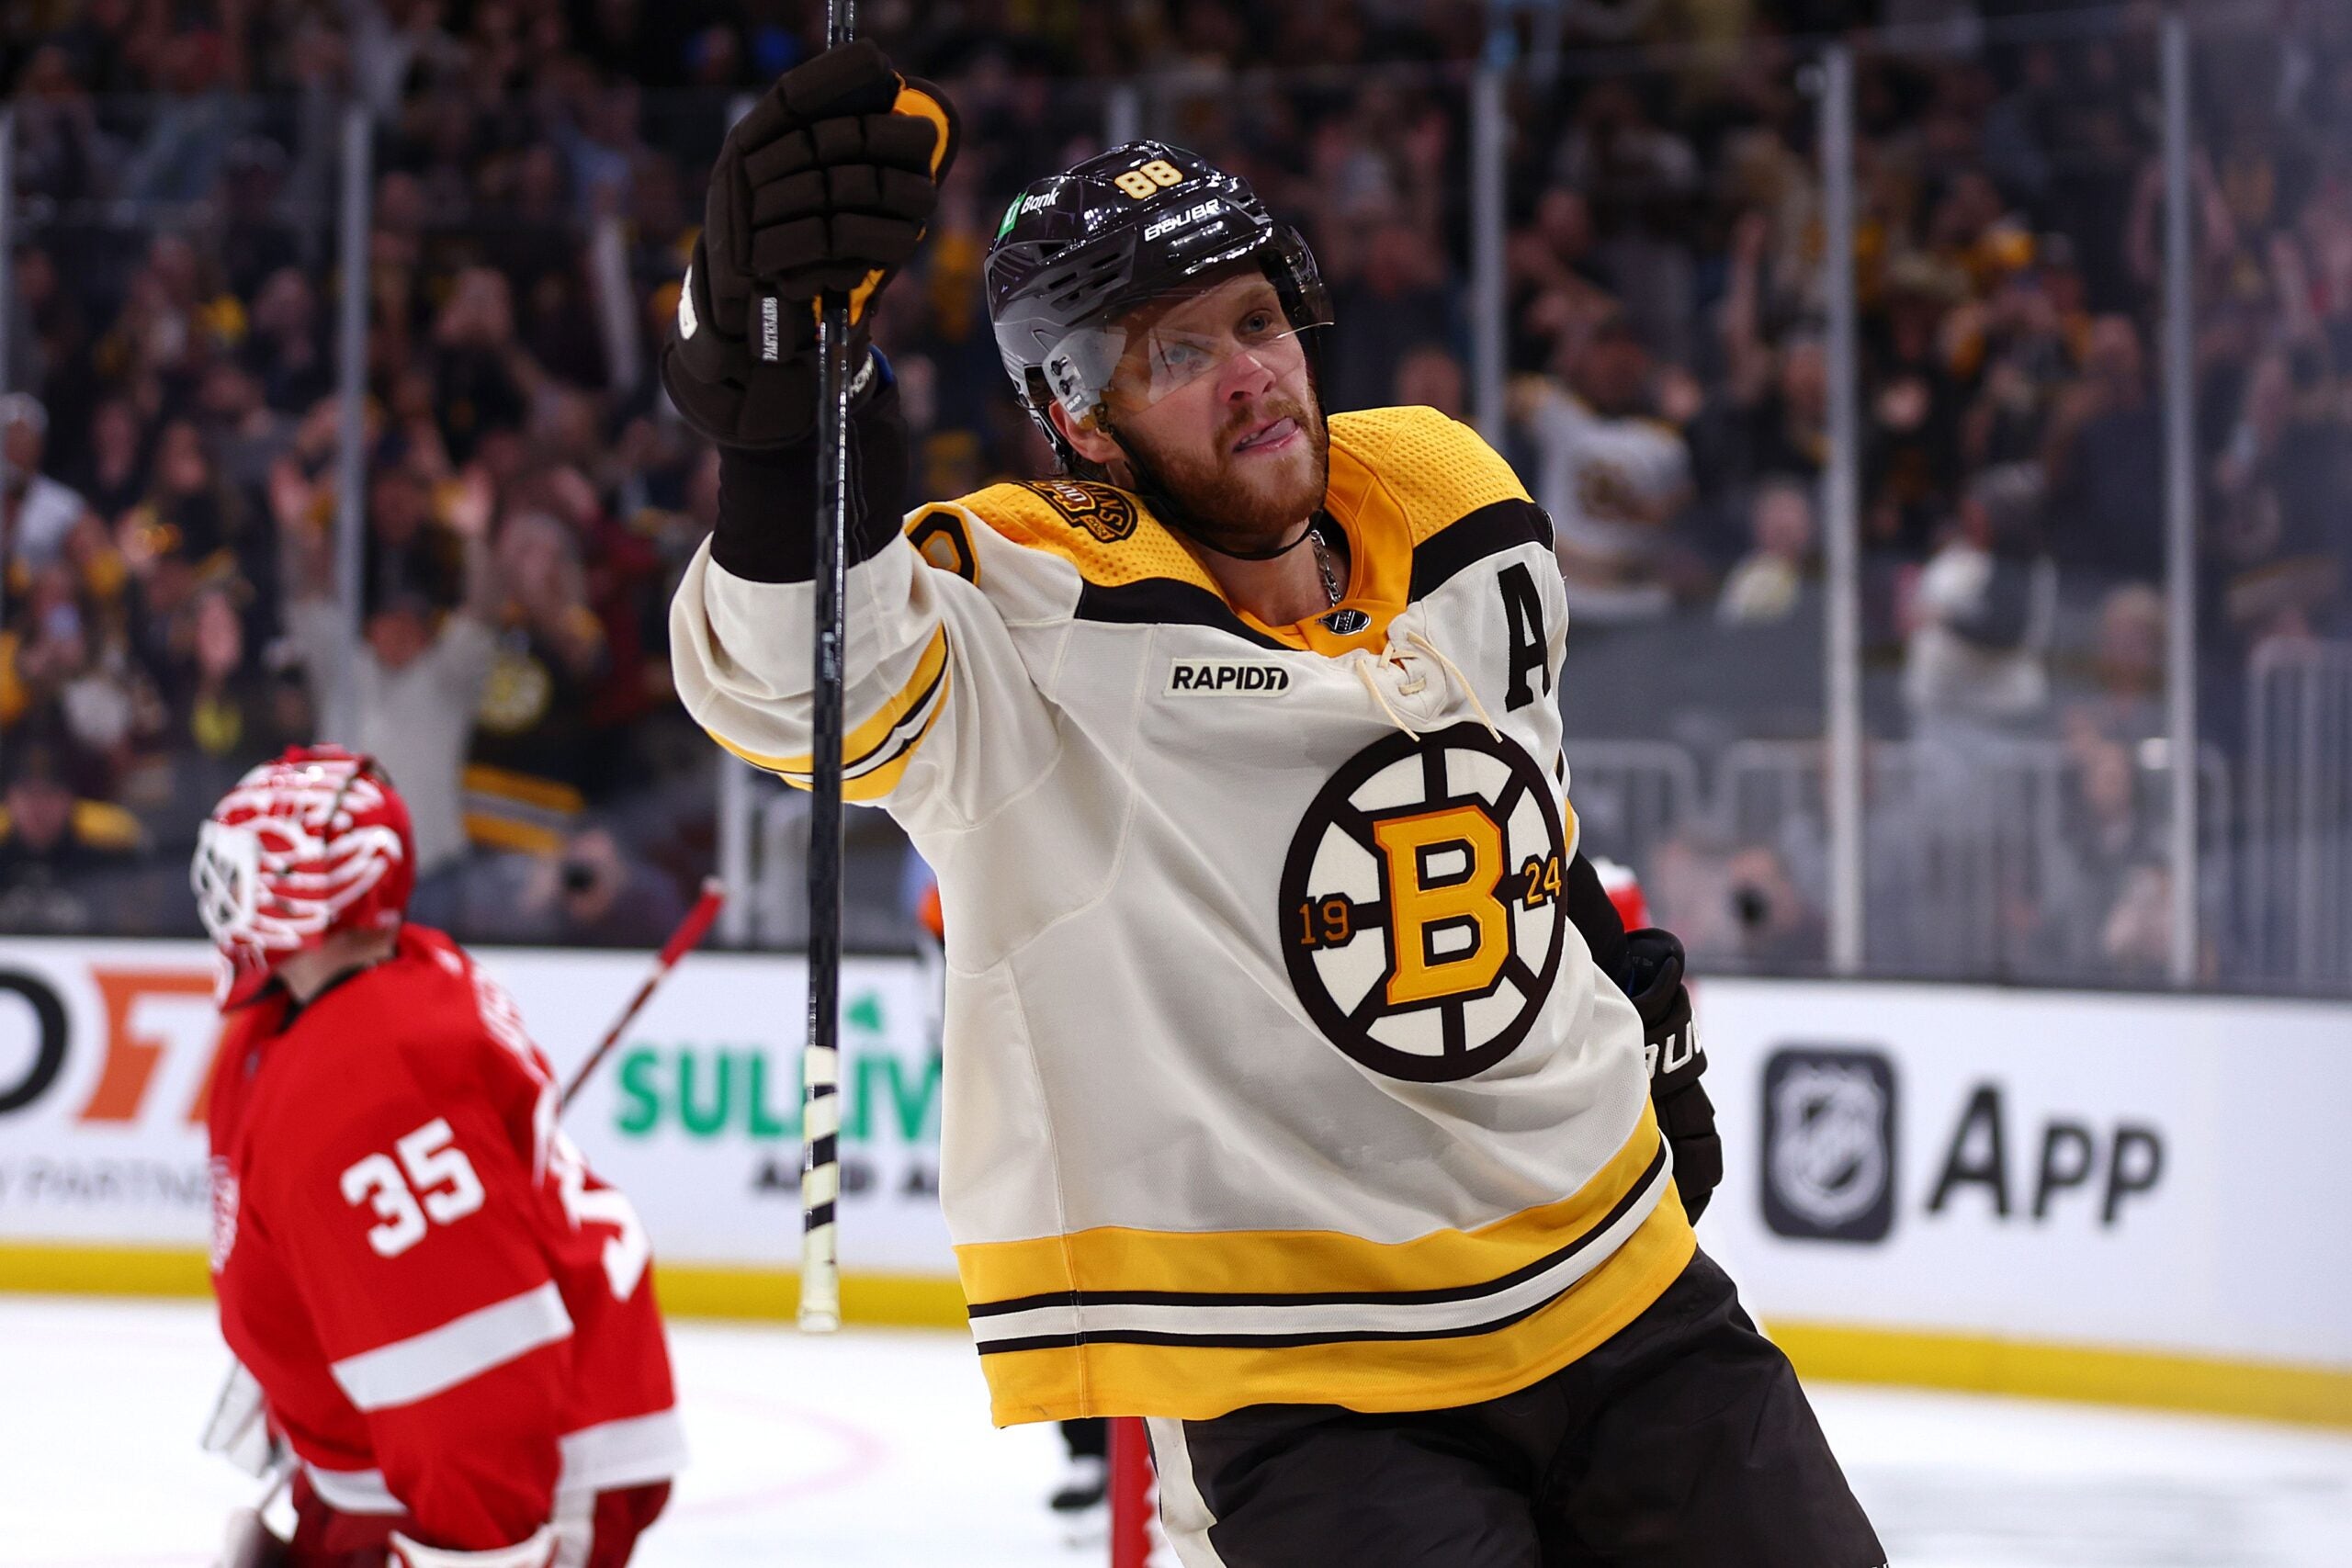 BOSTON, MASSACHUSETTS - OCTOBER 28: David Pastrnak #88 of the Boston Bruins celebrates after scoring a penalty shot awarded after he was slashed by Jake Walman #96 of the Detroit Red Wings during the third period at TD Garden on October 28, 2023 in Boston, Massachusetts. The Bruins defeat the Red Wings 4-1. (Photo by Maddie Meyer/Getty Images)